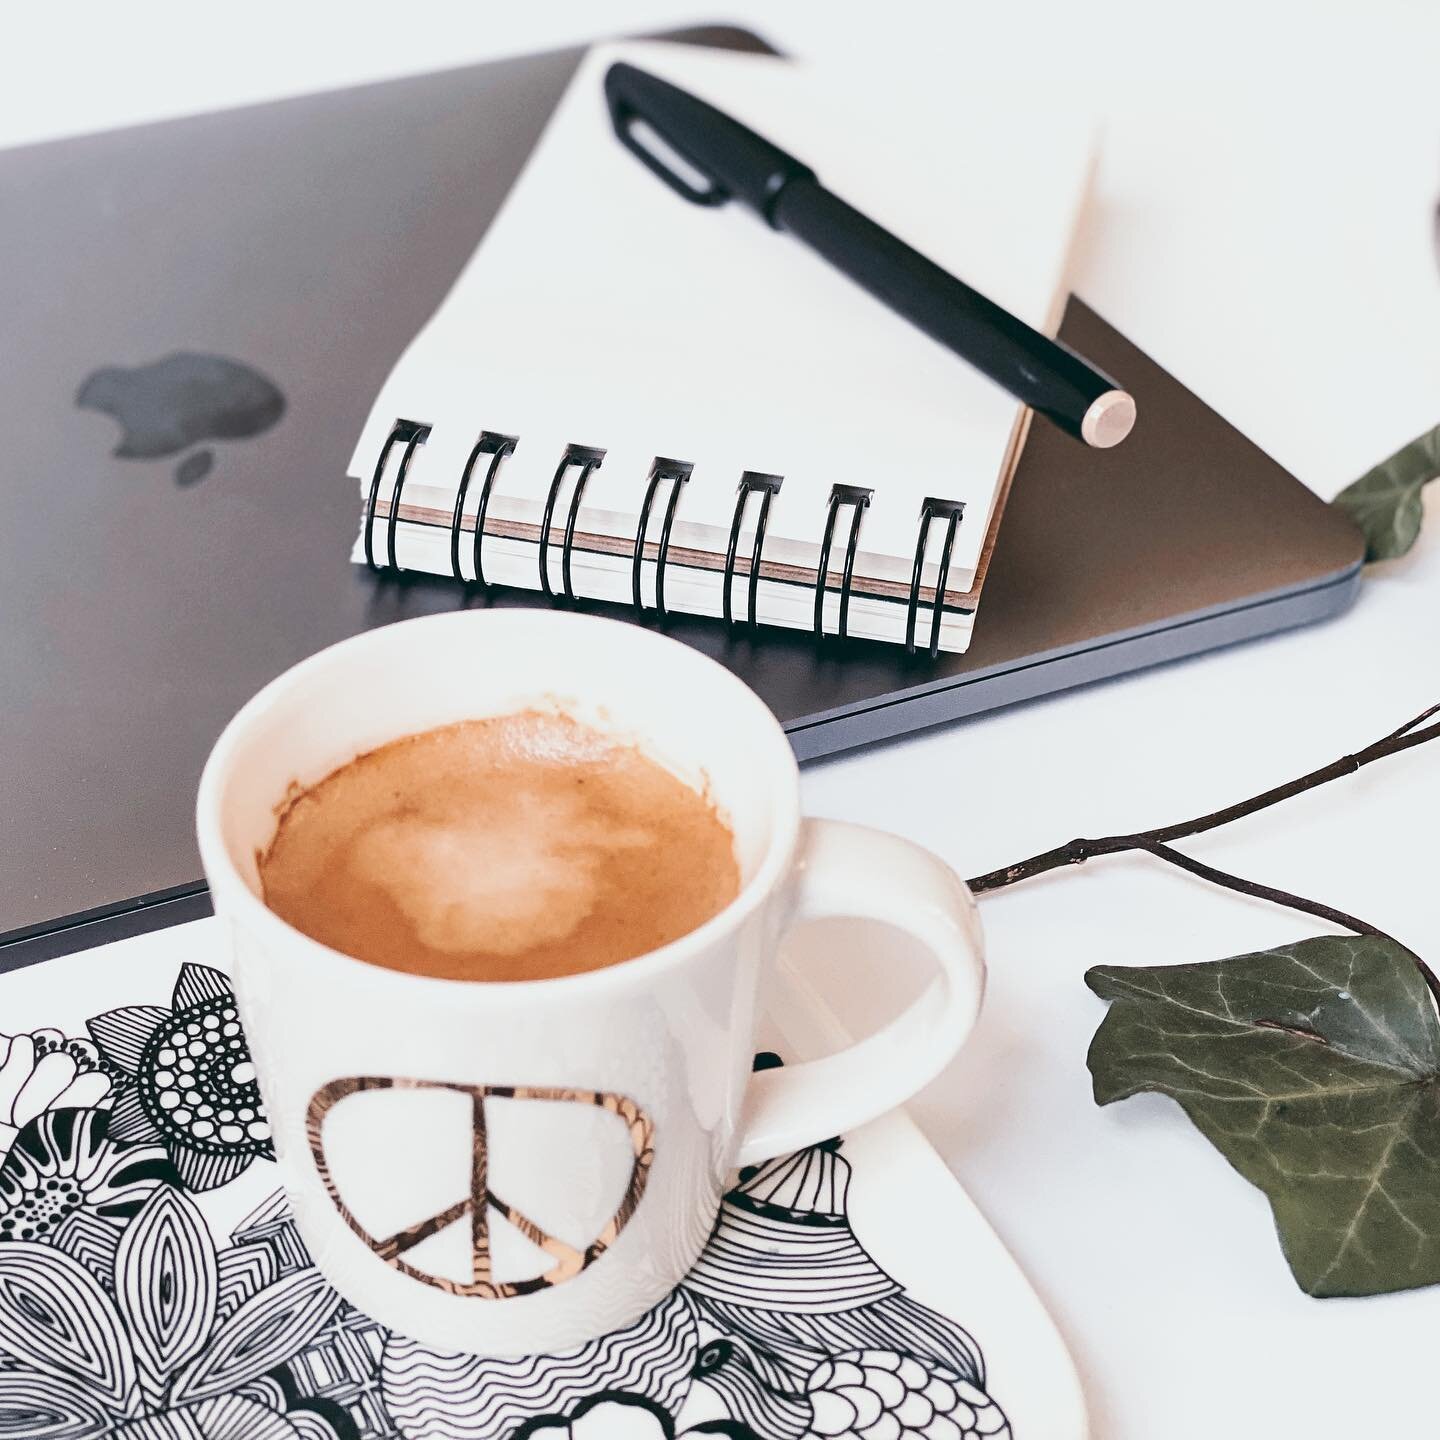 Brewed myself a double shot of espresso with a splash of oat milk (my favorite) and set up my macbook to get some work done behind the screen. ⁣
⁣⁣
⁣When it comes to setting goals in my business, I don&rsquo;t just wait for Monday or the first of the